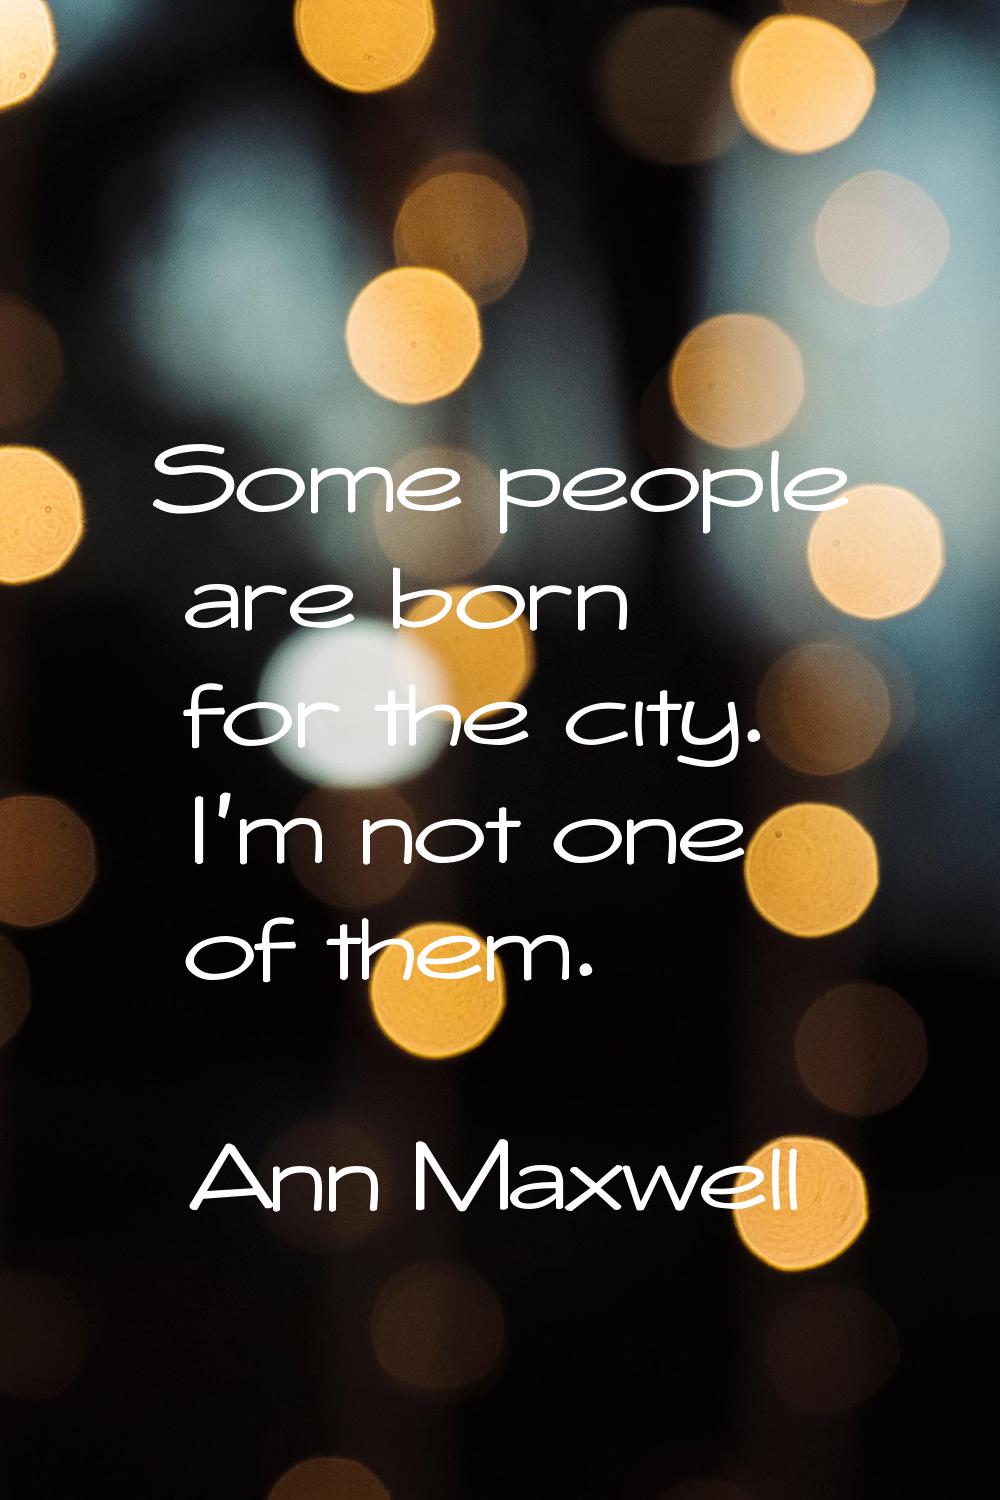 Some people are born for the city. I'm not one of them.